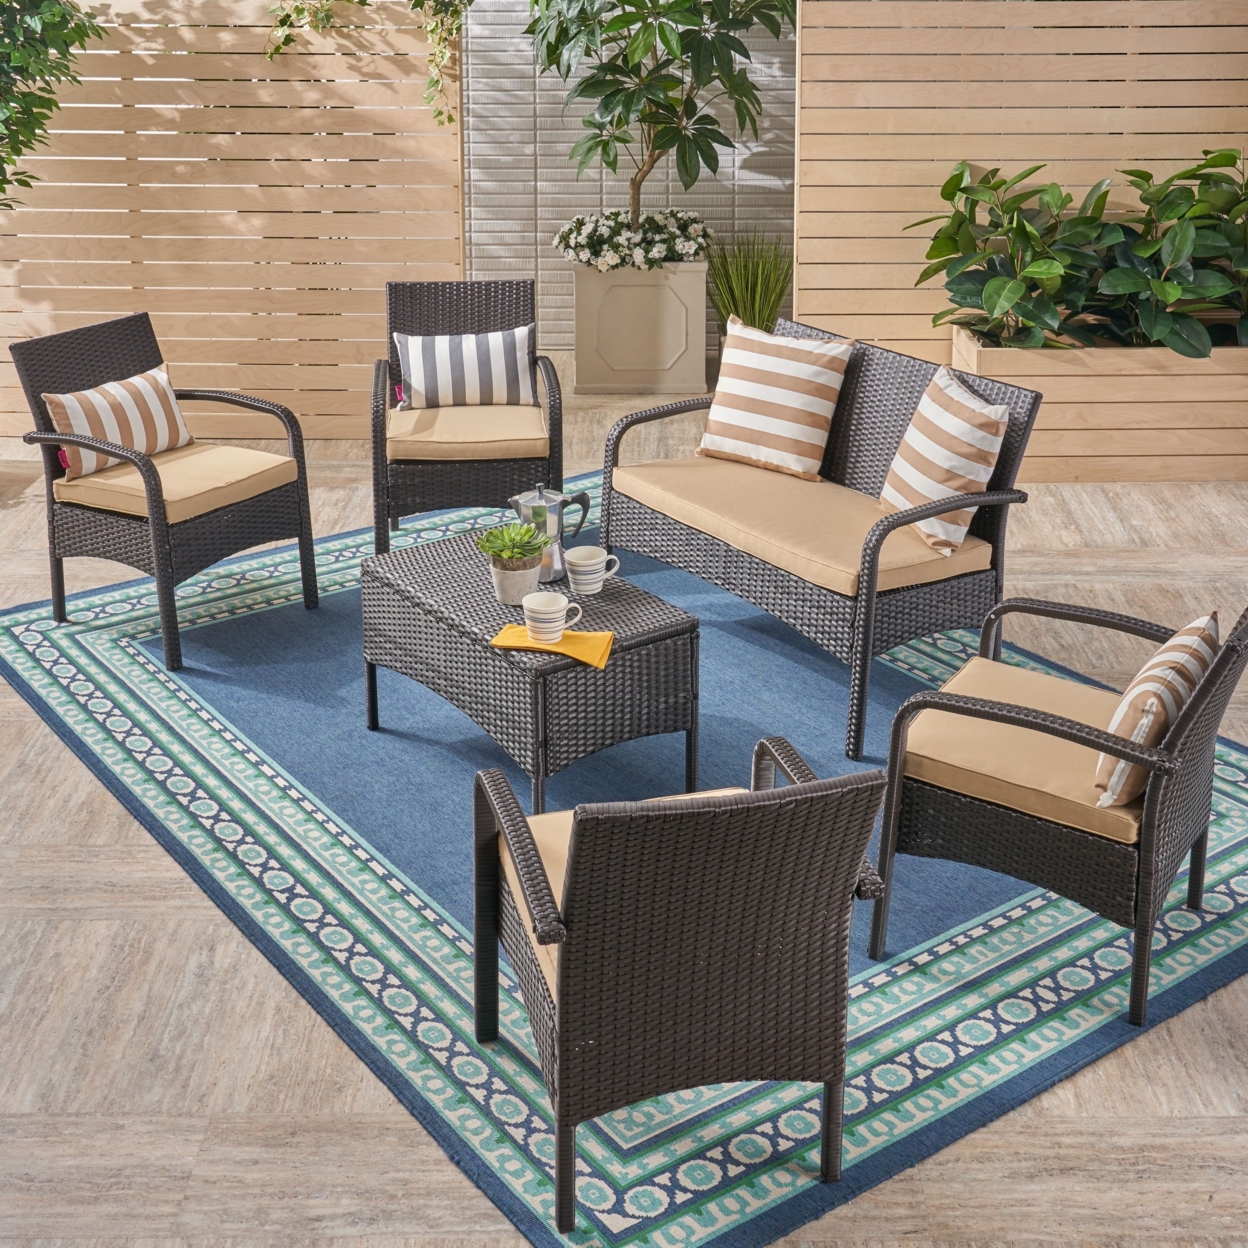 Mavis Patio Conversation Set, 6-Seater With Loveseat, Club Chairs, And Coffee Table, Brown Wicker With Tan Outdoor Cushions